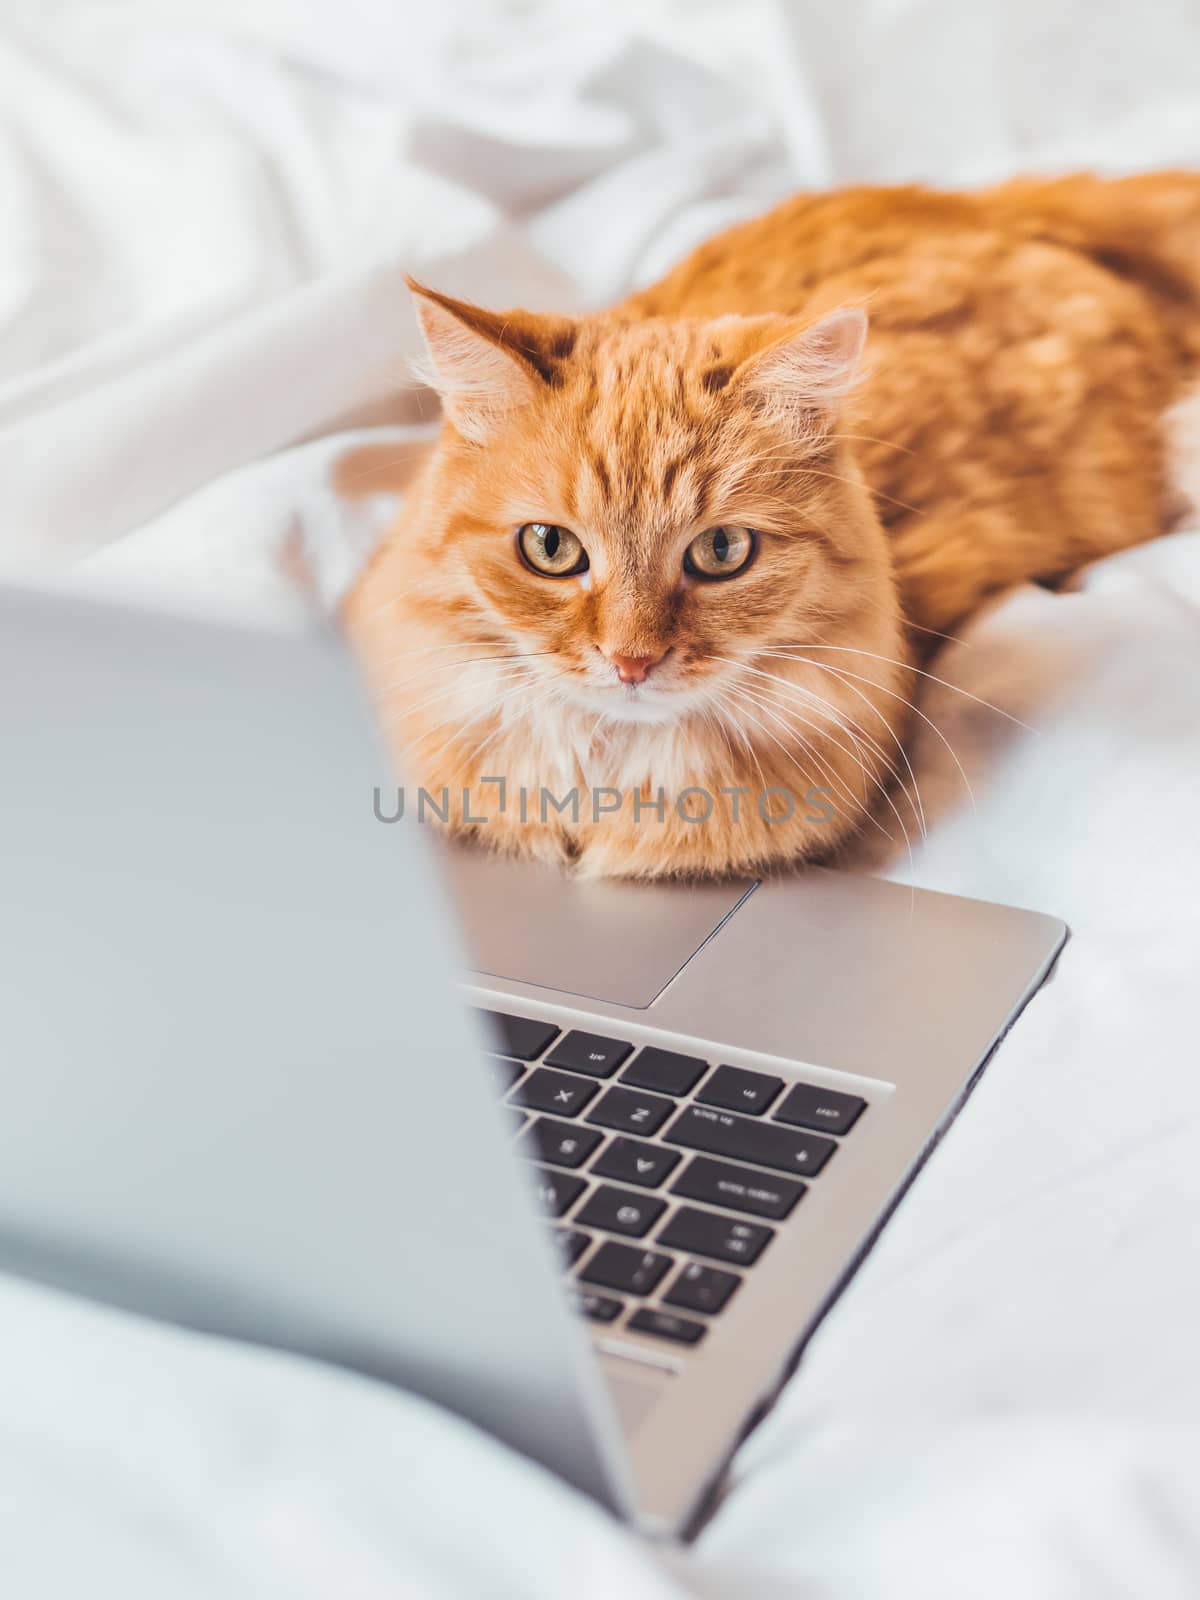 Cute ginger cat lying in bed with laptop. Fluffy pet with computer. Fuzzy domestic animal works remotely like human. Cozy home.